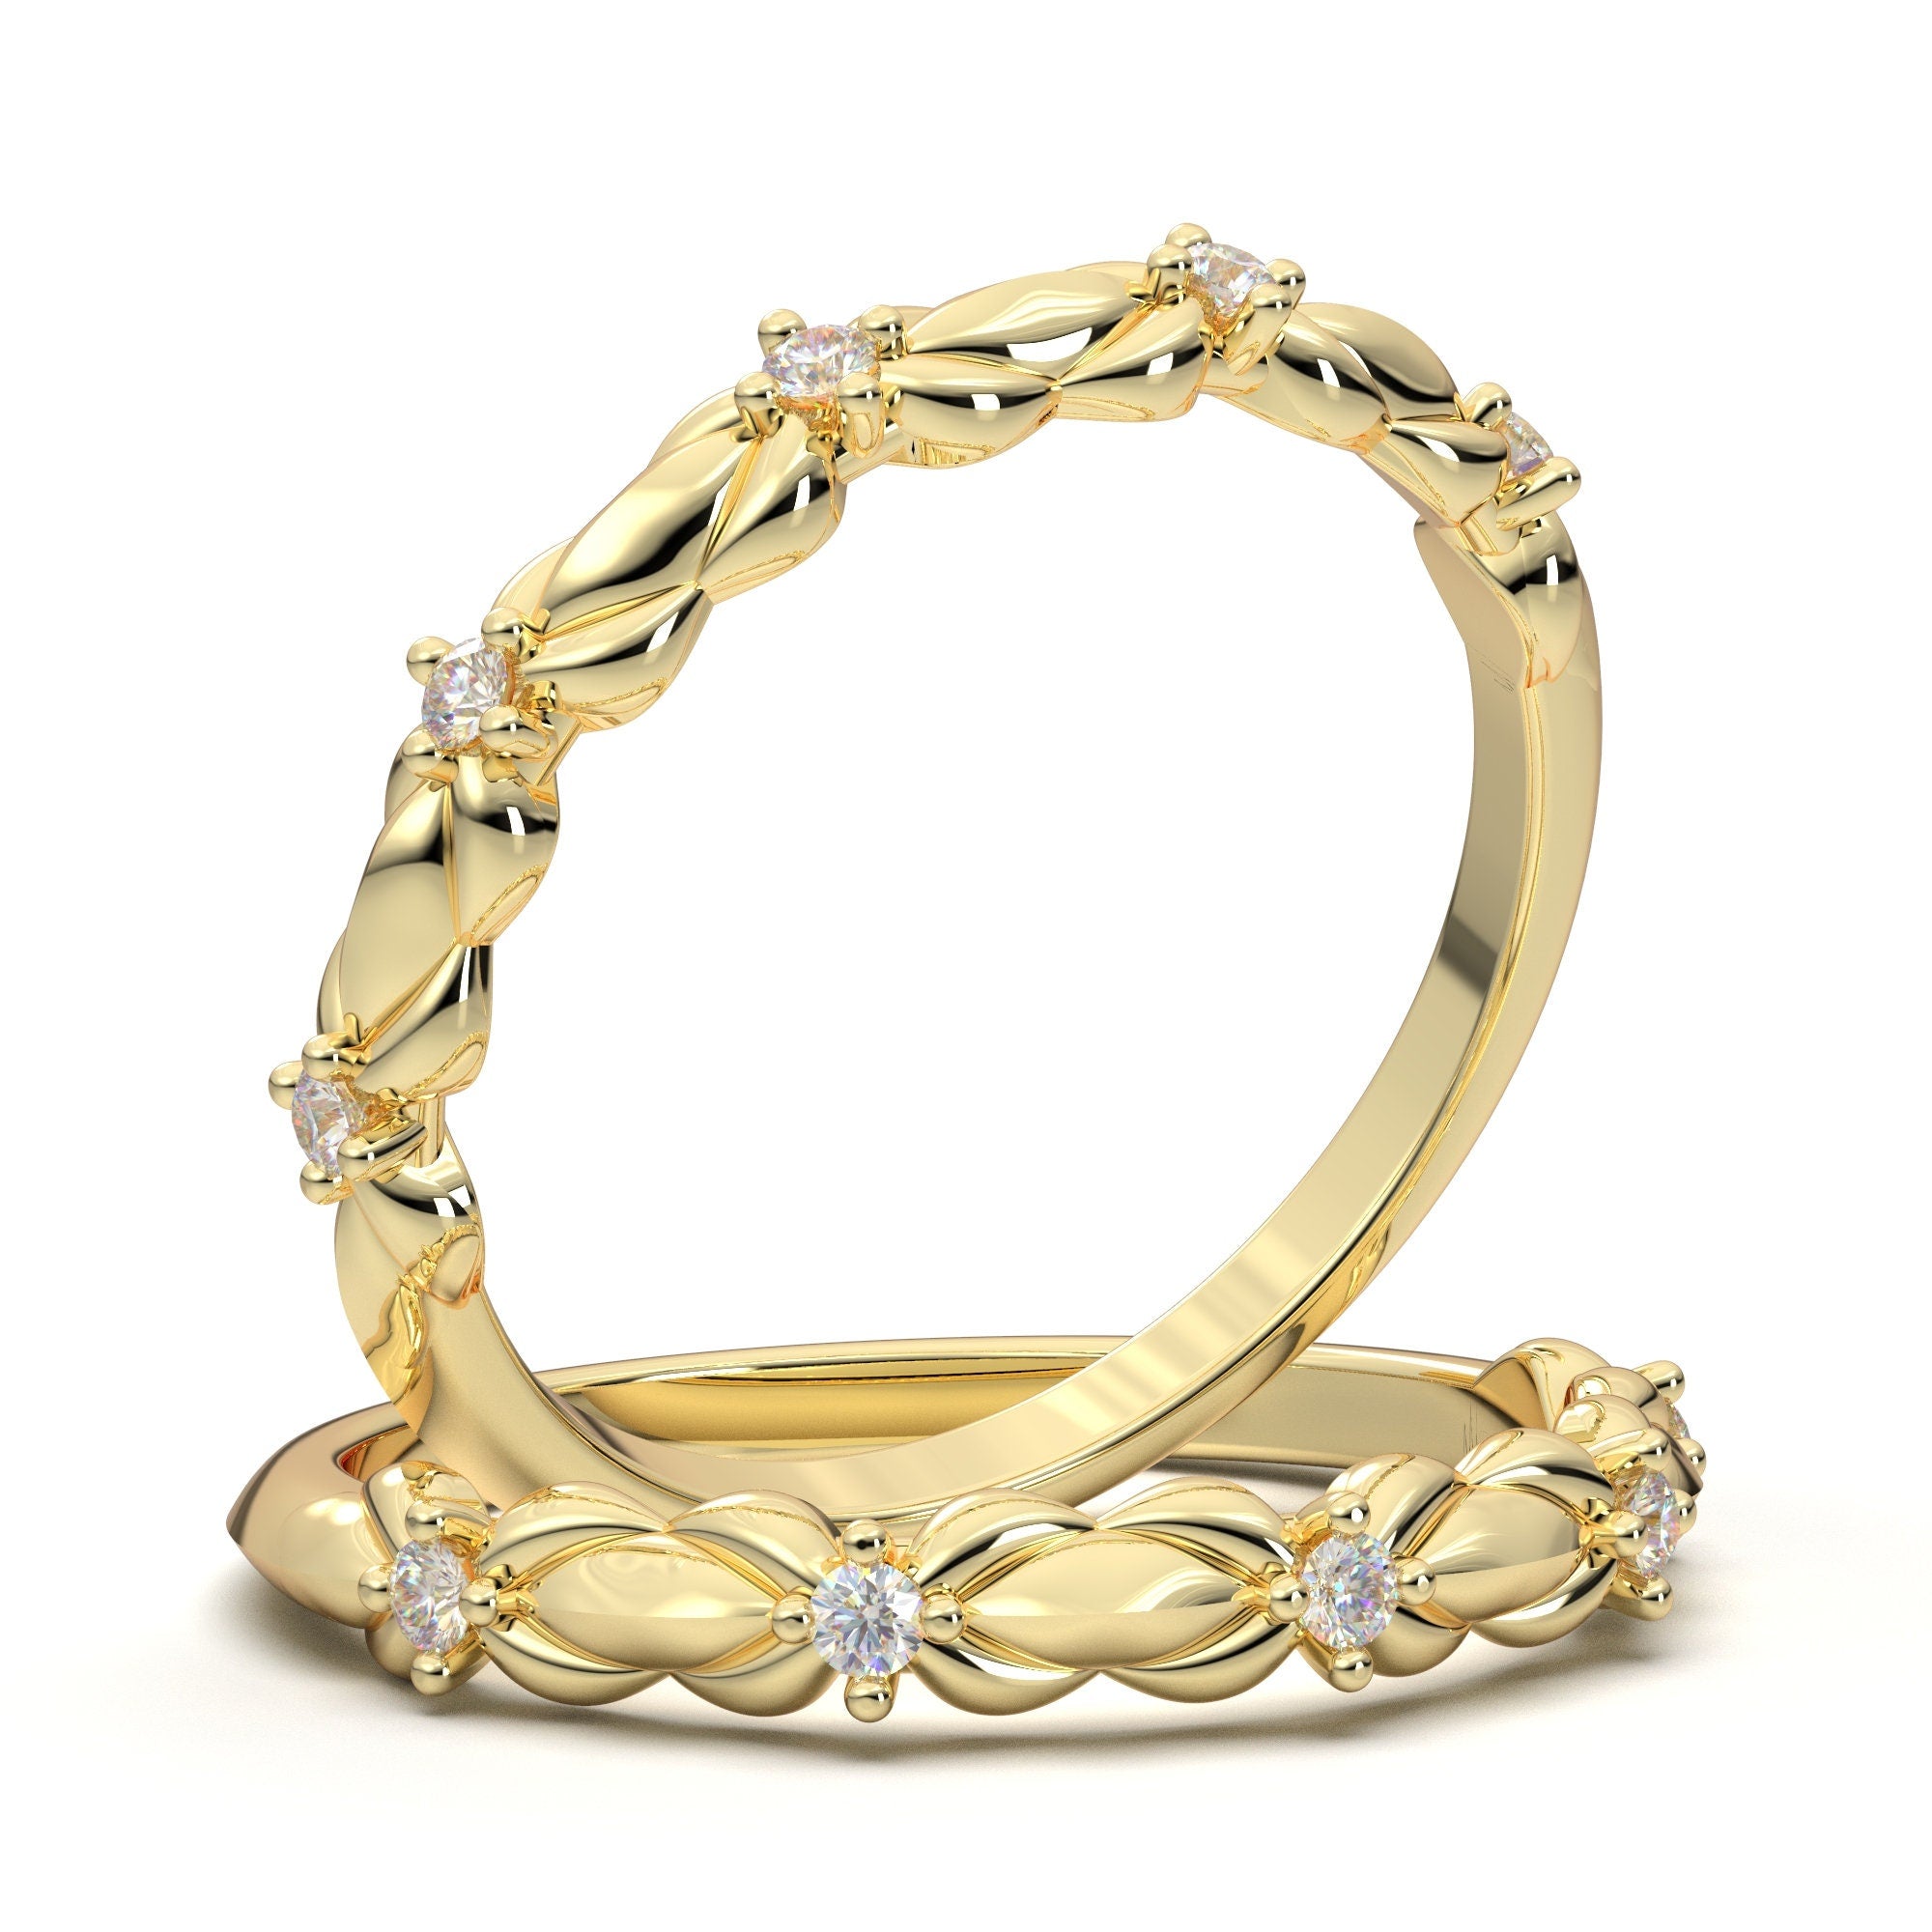 Buy Gold Rings for Women by Fashion Frill Online | Ajio.com